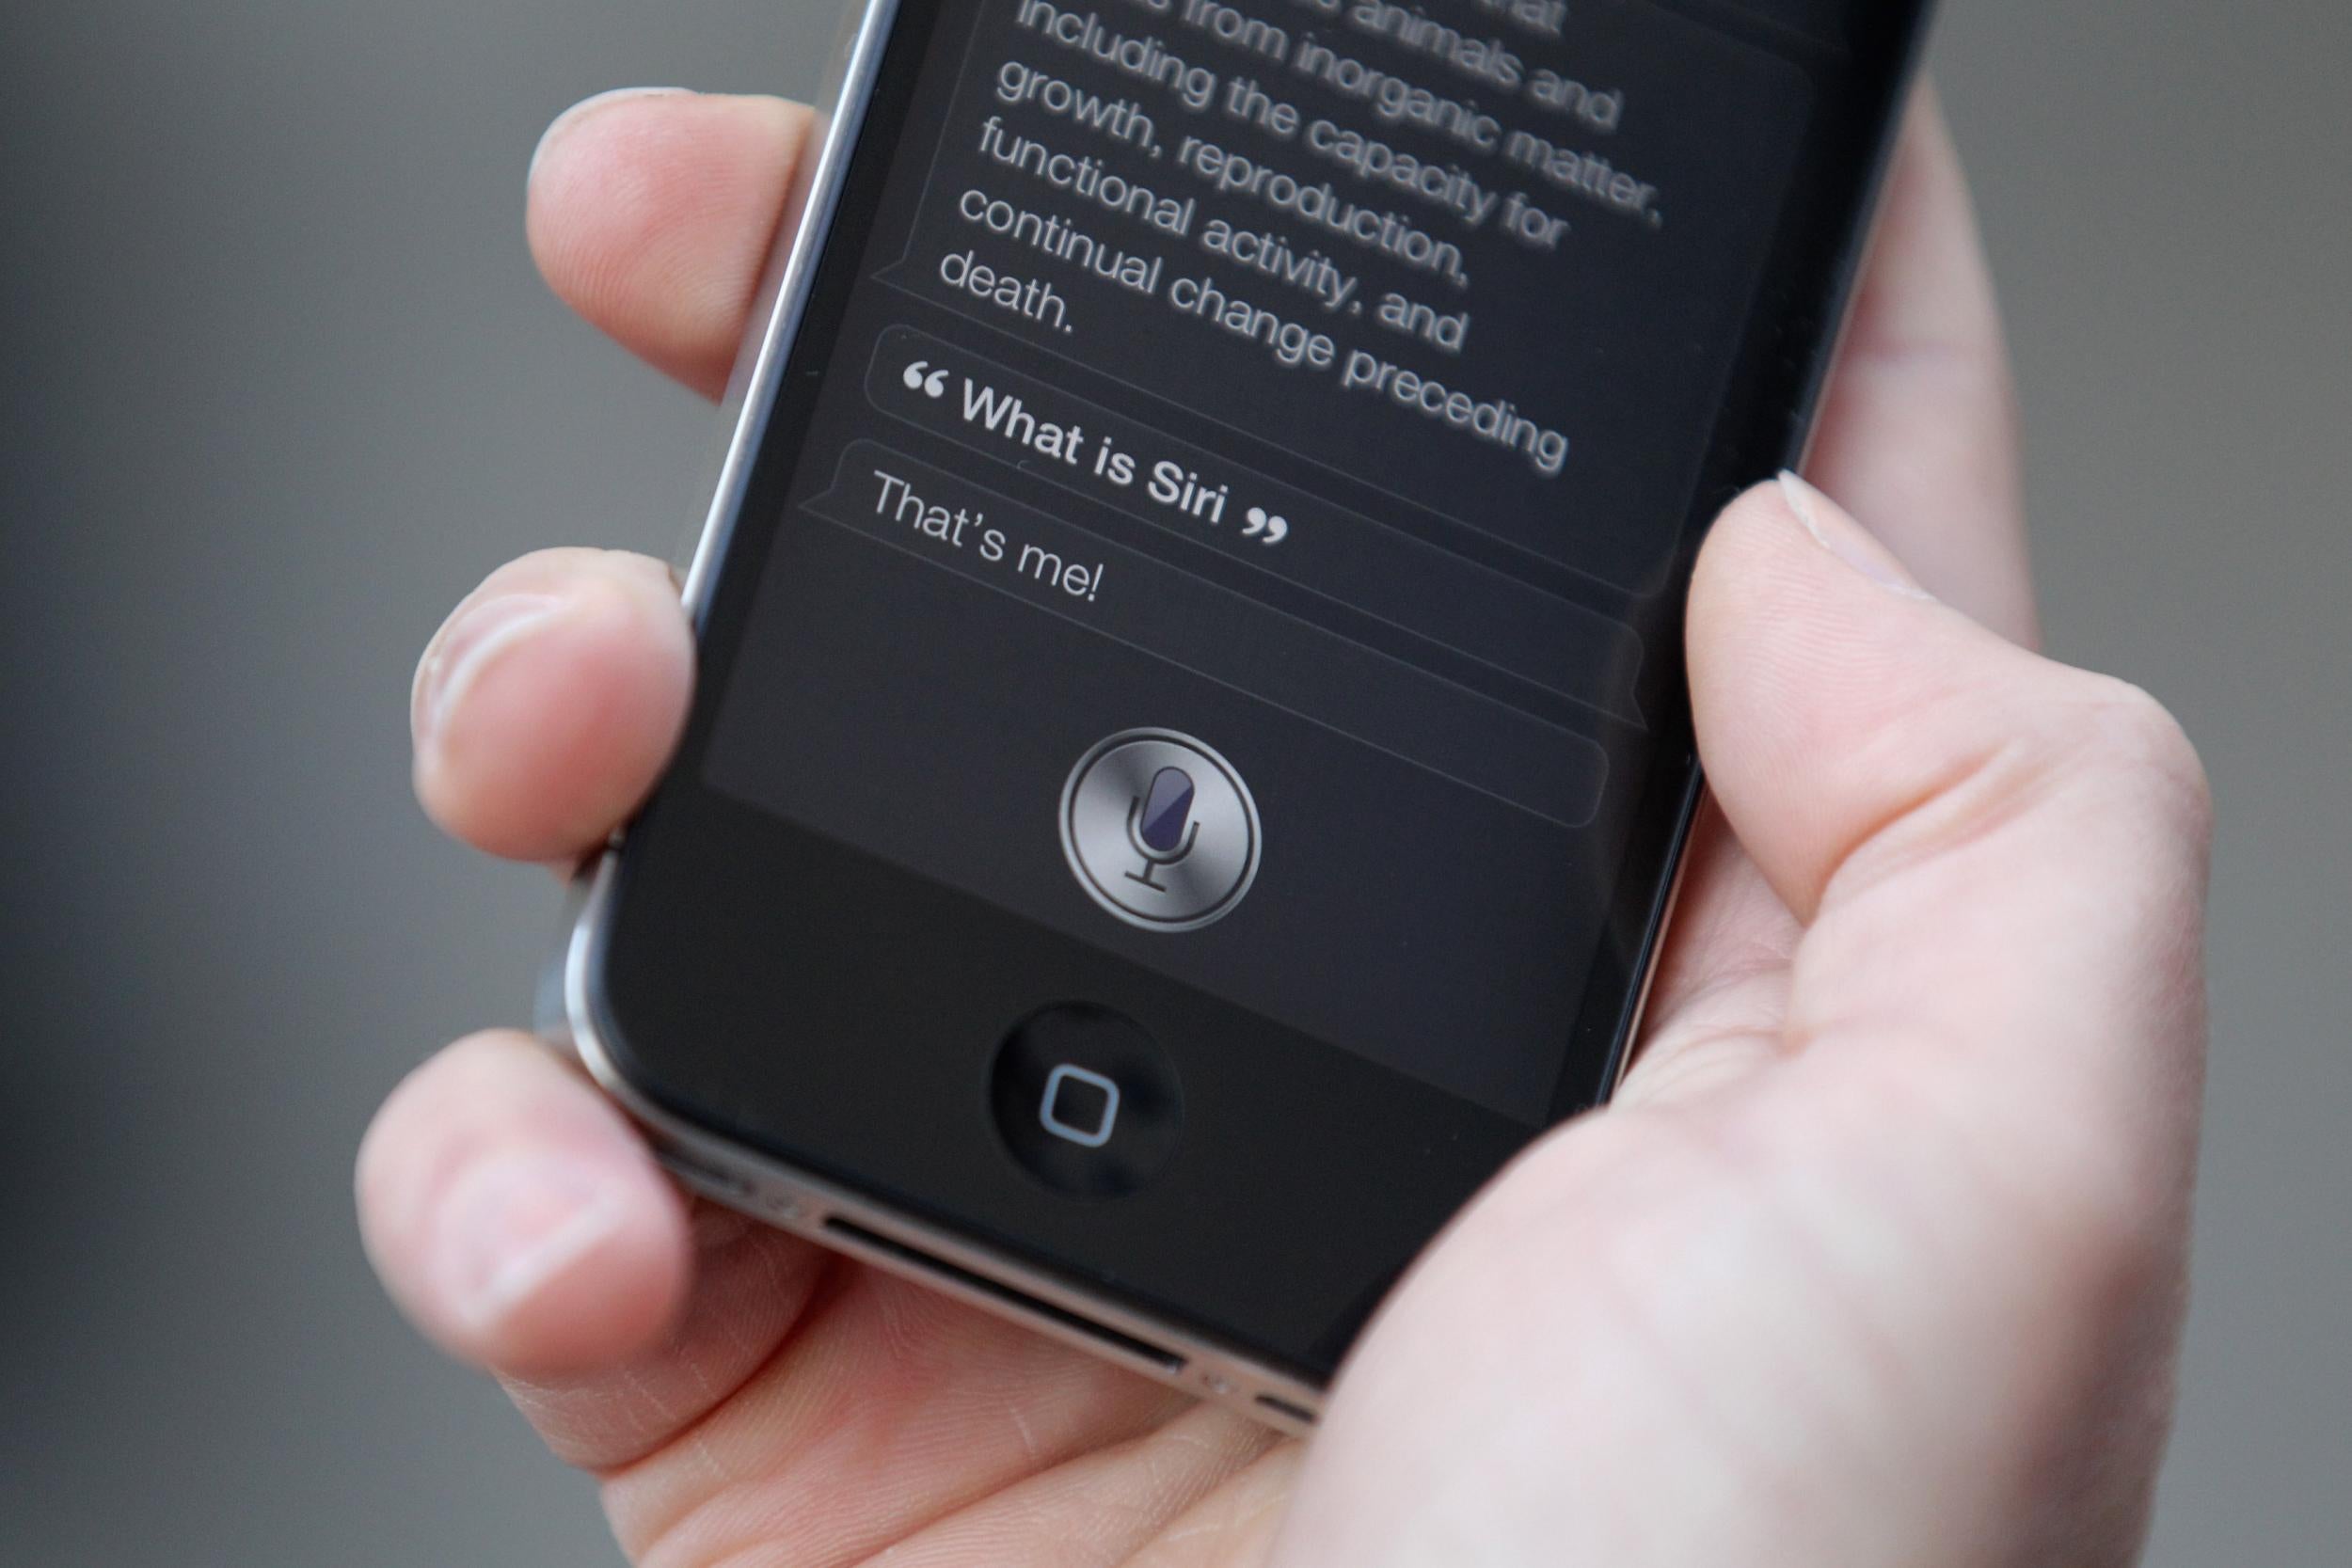 Siri first appeared on the iPhone 4S, pictured